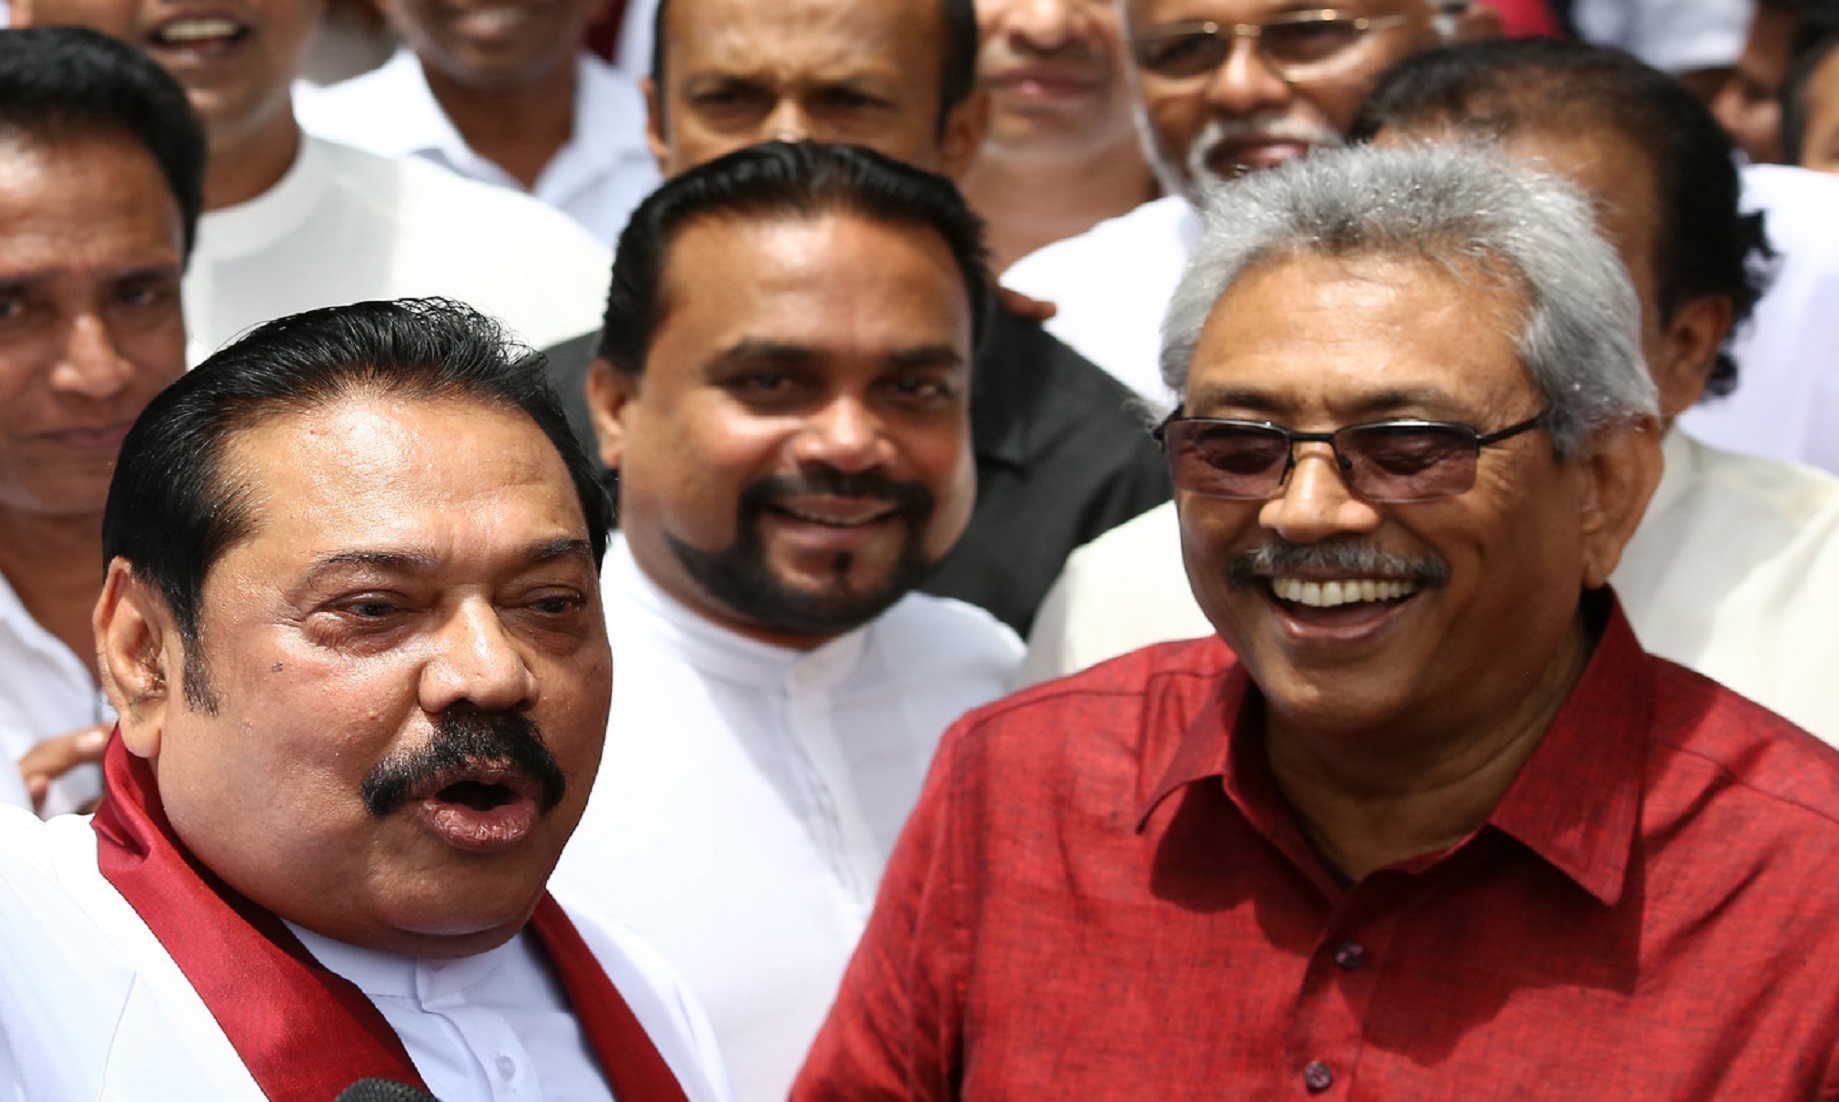 Update with official results: Gotabaya Rajapaksa wins Sri Lankan presidential election